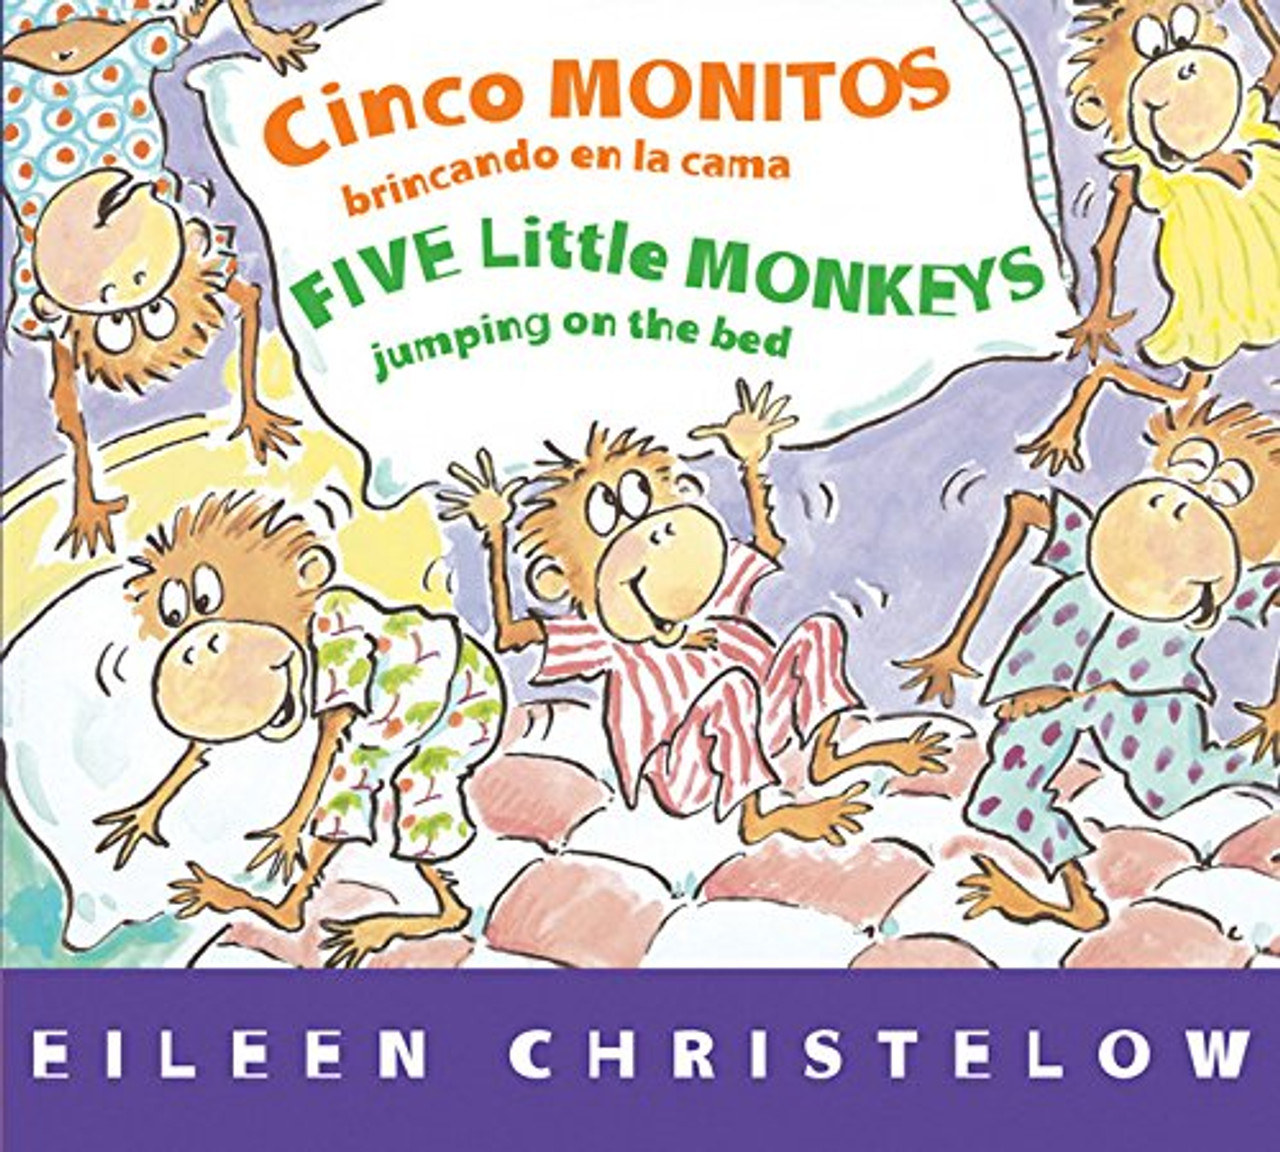 As soon as they say good night to Mama, the five little monkeys start to jump on their bed. But trouble lies ahead as, one by one, they fall off and hurt themselves. Now in a sturdy board book format for Spanish- and English-speaking readers